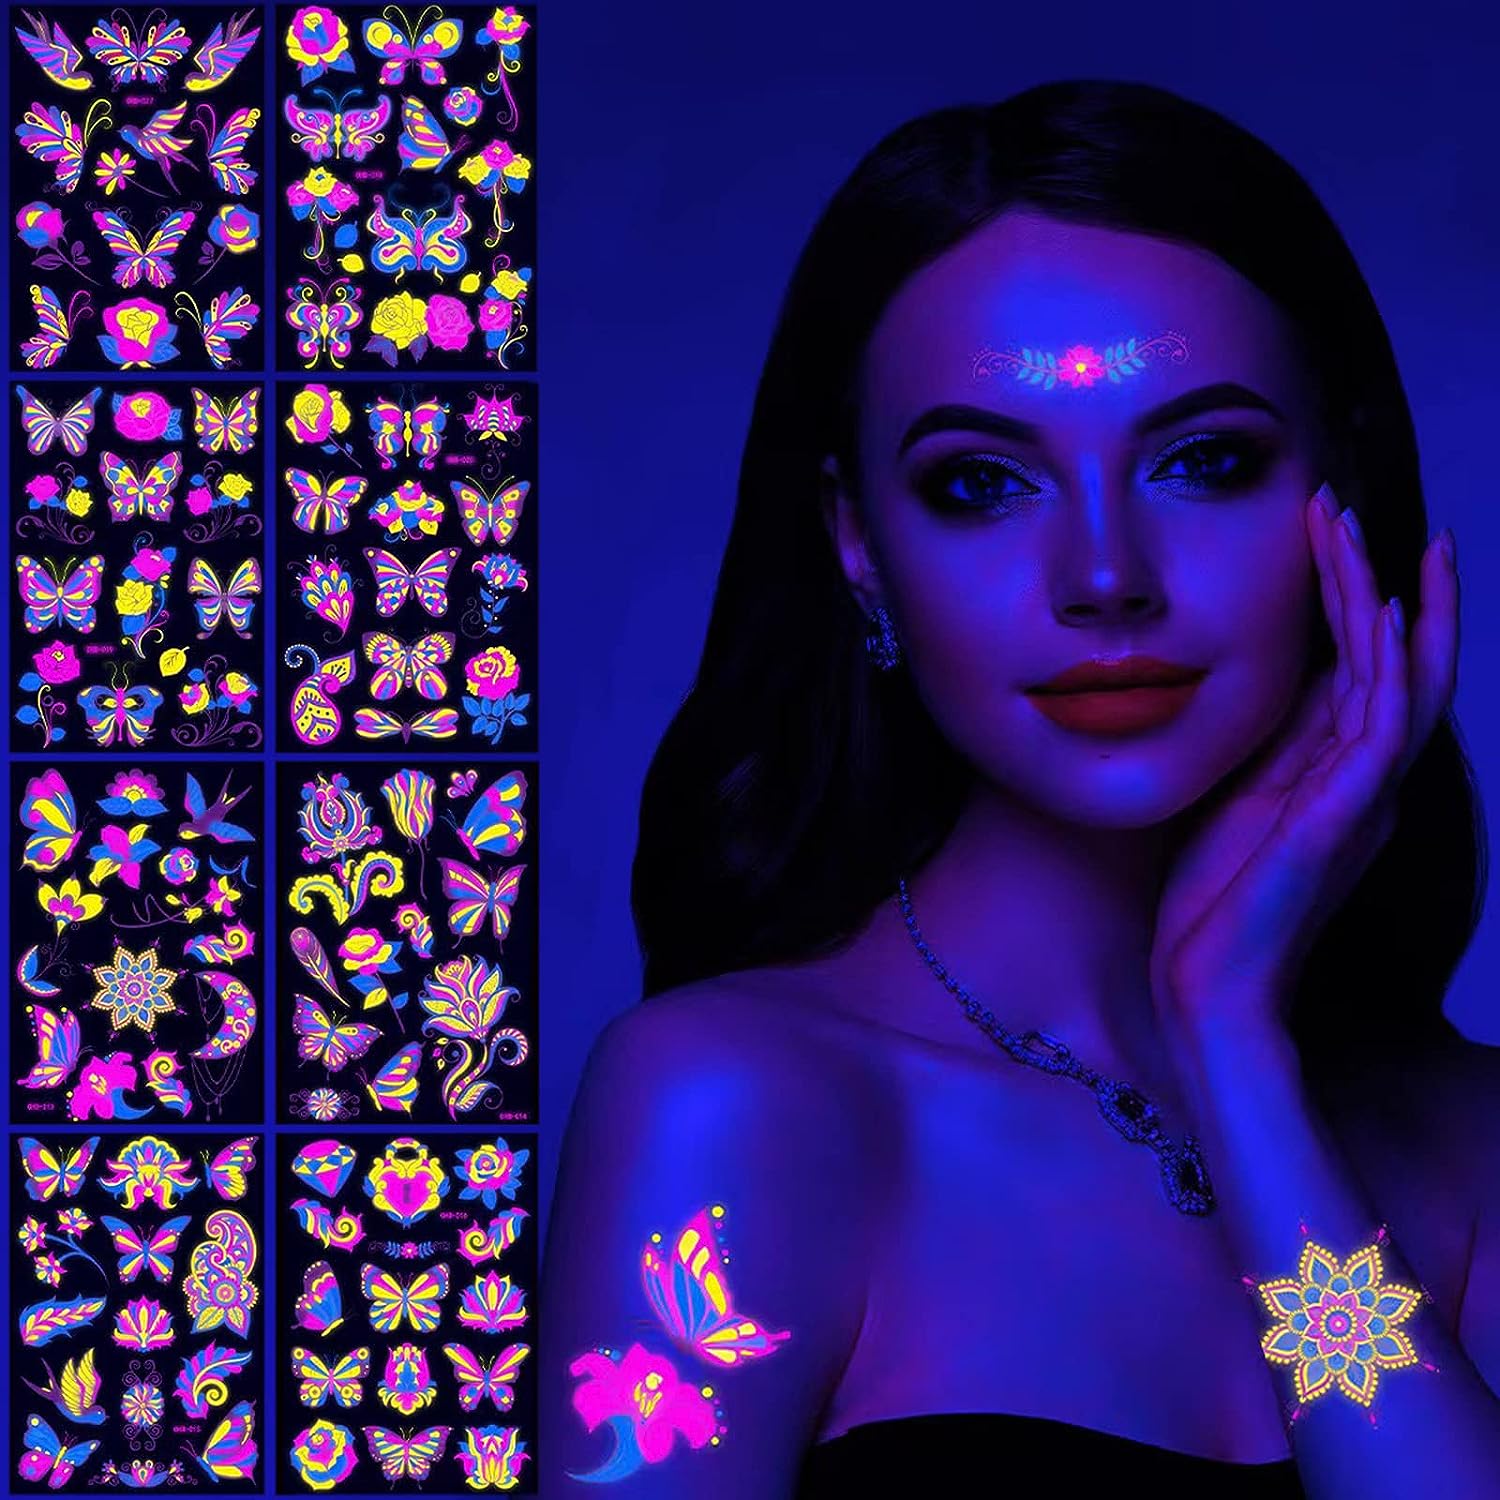 Neon Temporary Tattoos 8 Large Sheets Butterfly Flower Swallow Glitter Tattoos Stickers 100+Mixed Style New Cute Animal Glow In The Dark UV Neon Flash Fake Tattoos